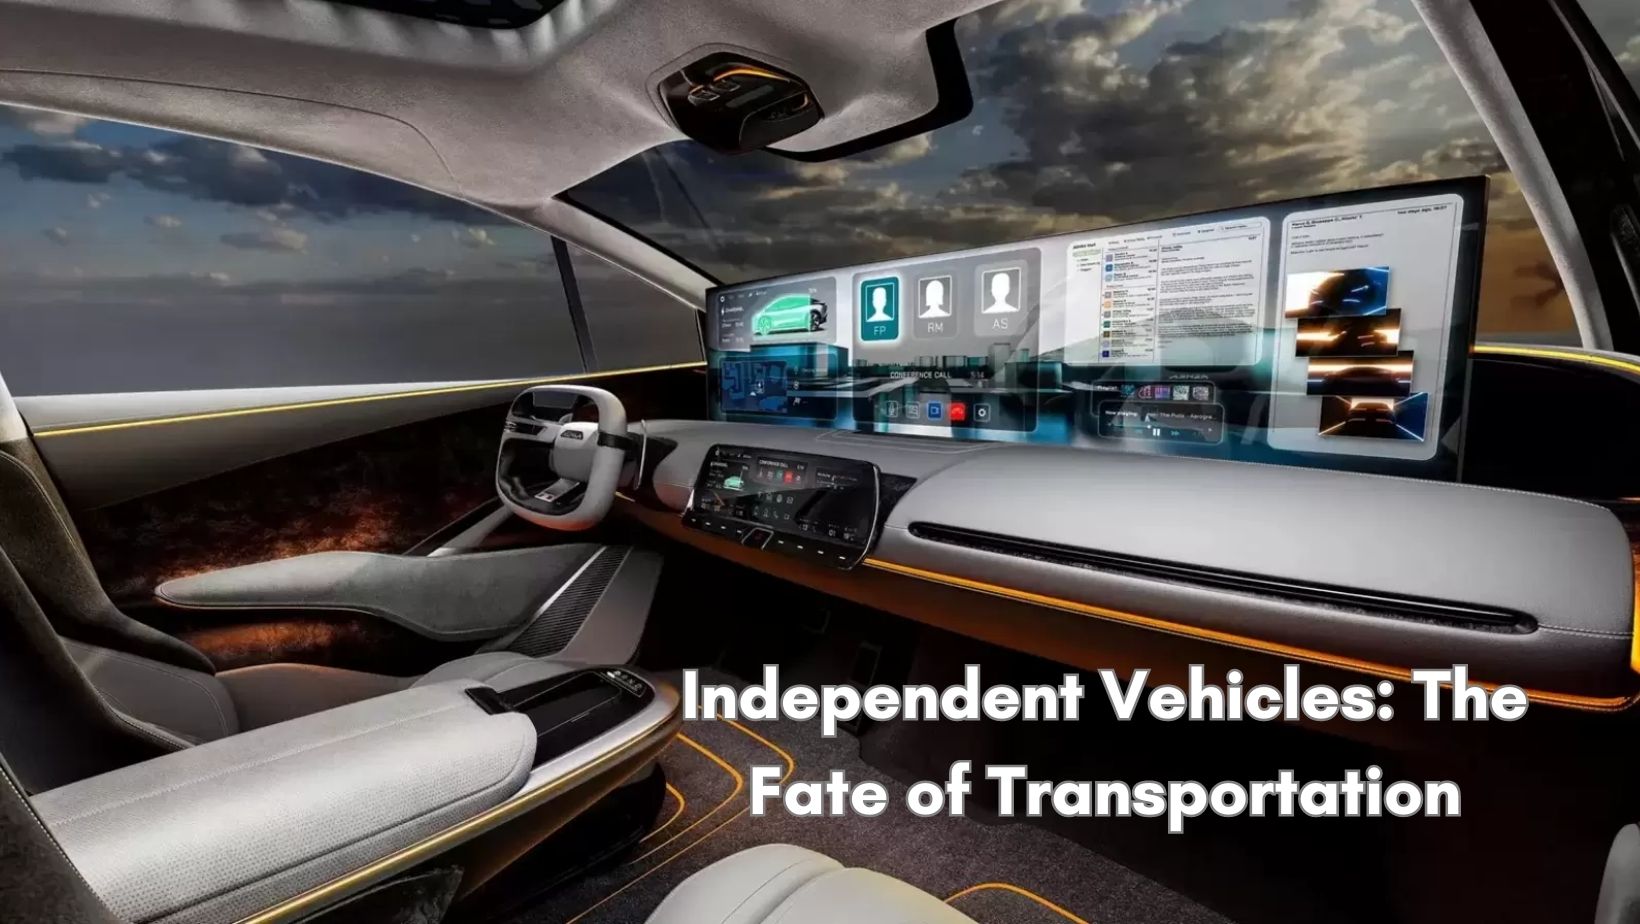 Independent Vehicles: The Fate of Transportation